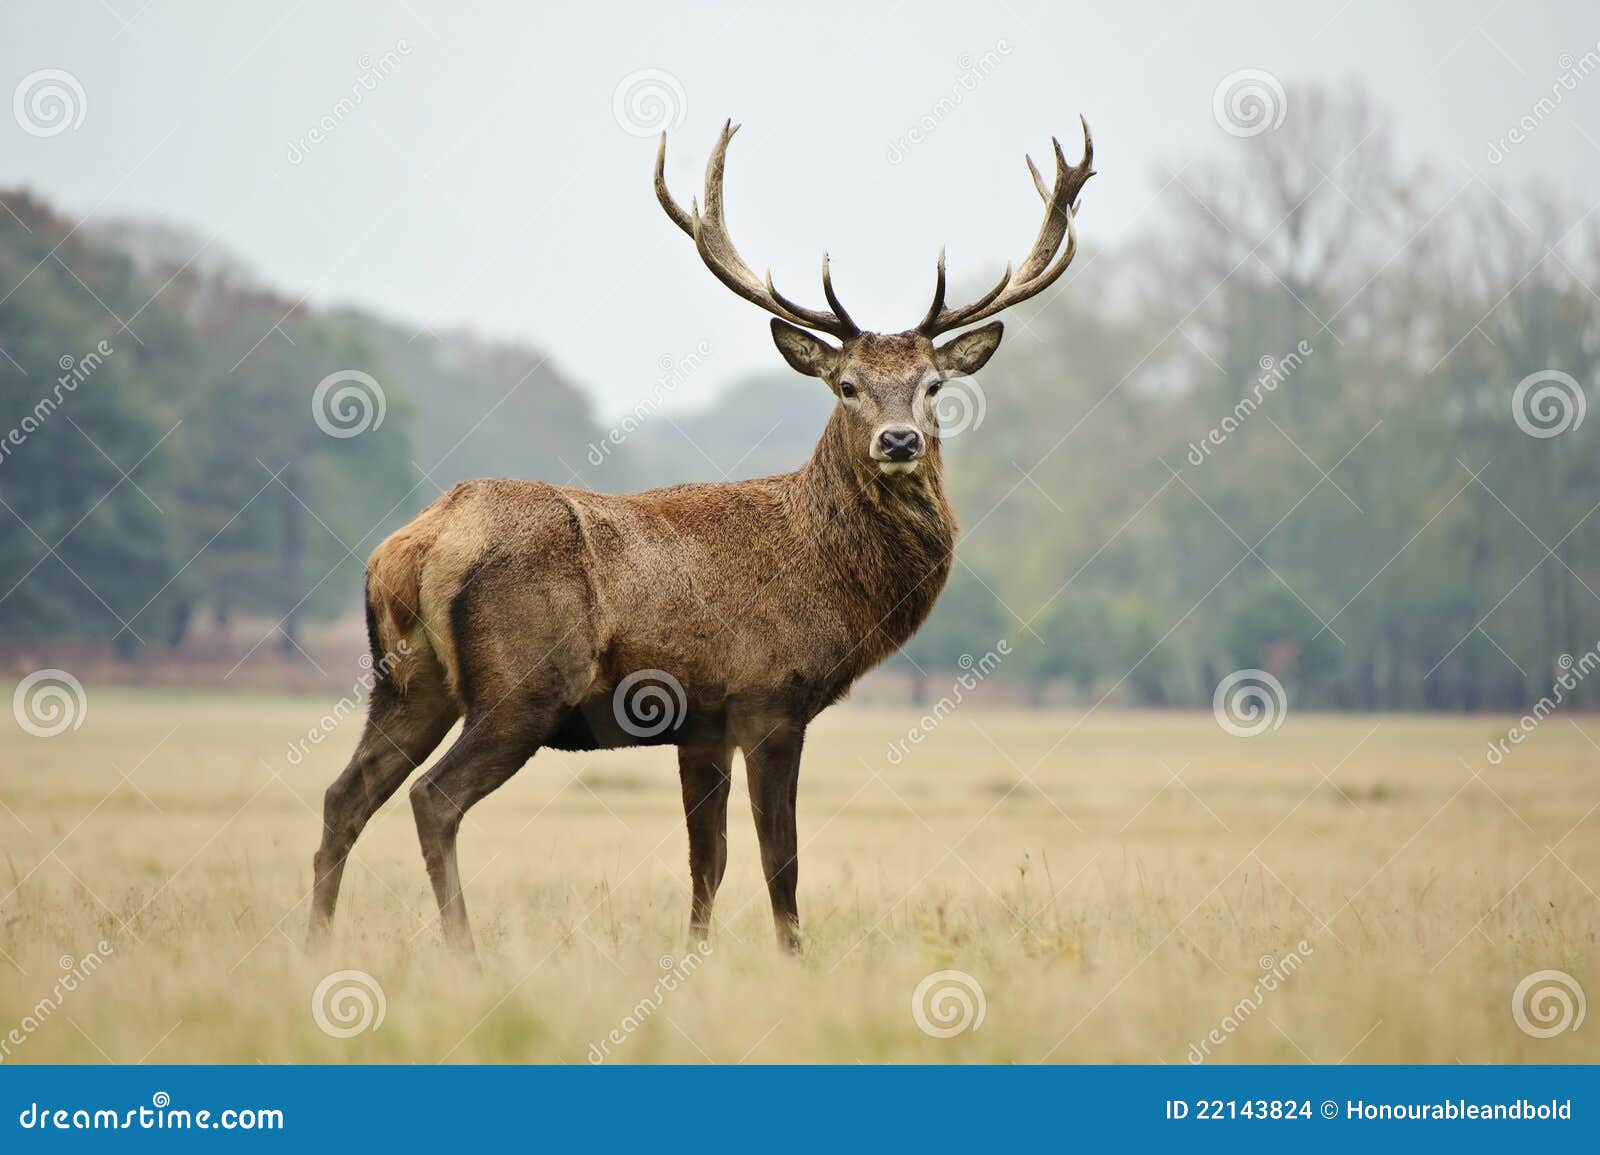 portrait of majestic red deer stag in autumn fall